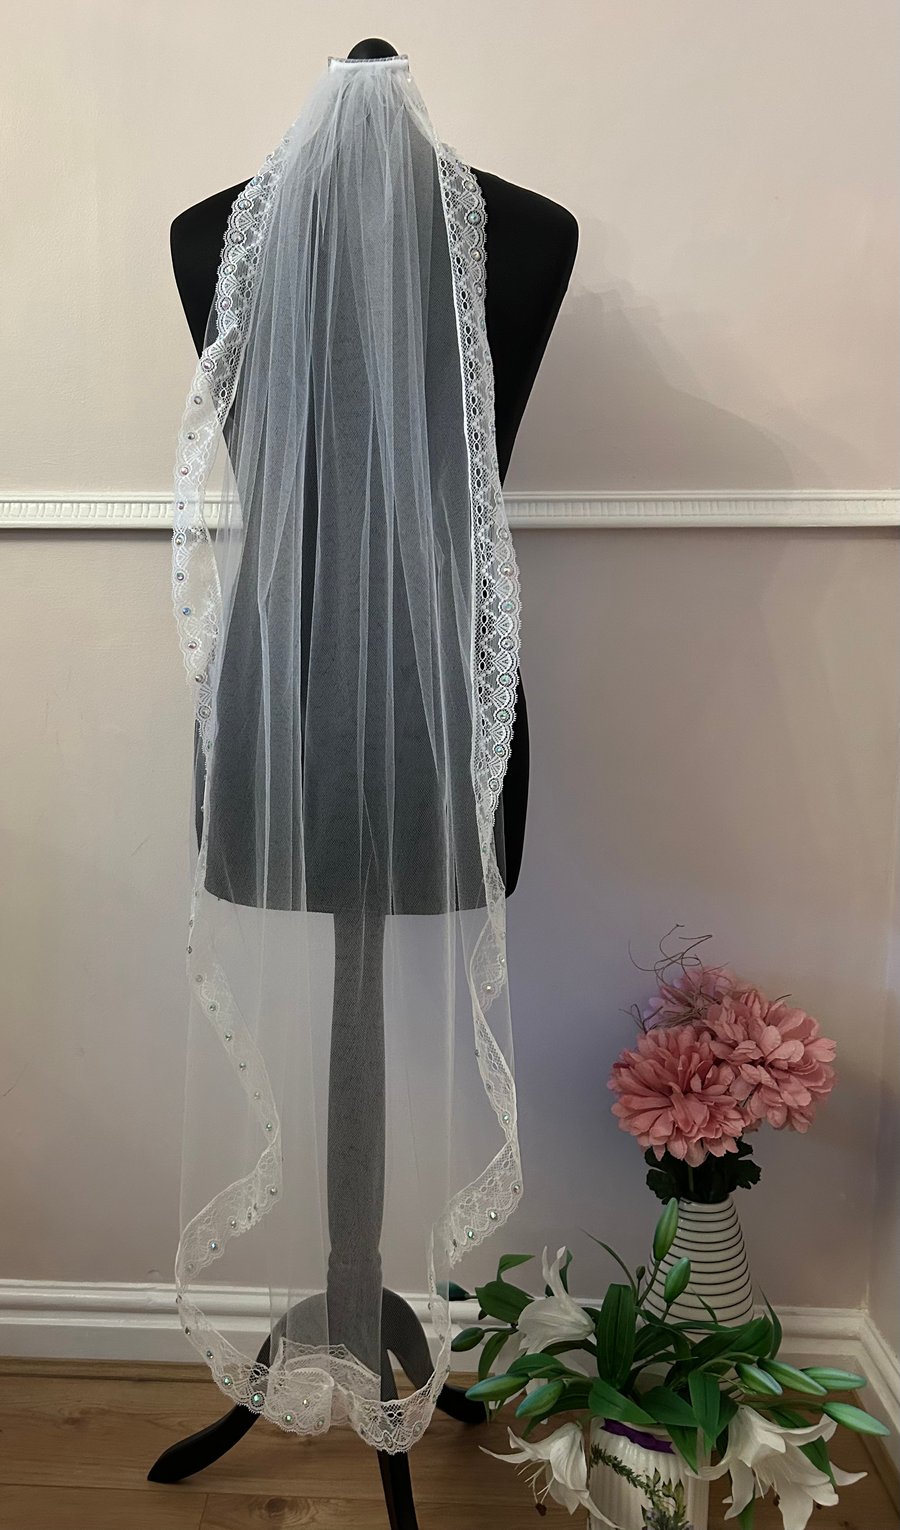 Wedding veil with lace and ab crystals